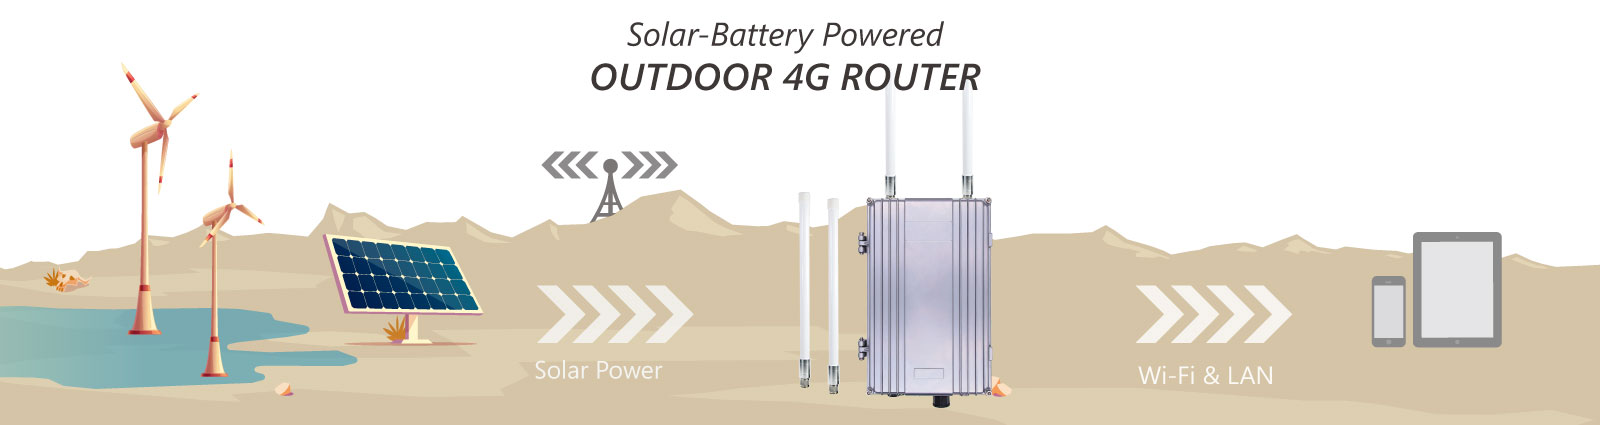 Solar-Battery Powered Outdoor WiFi 4G Router